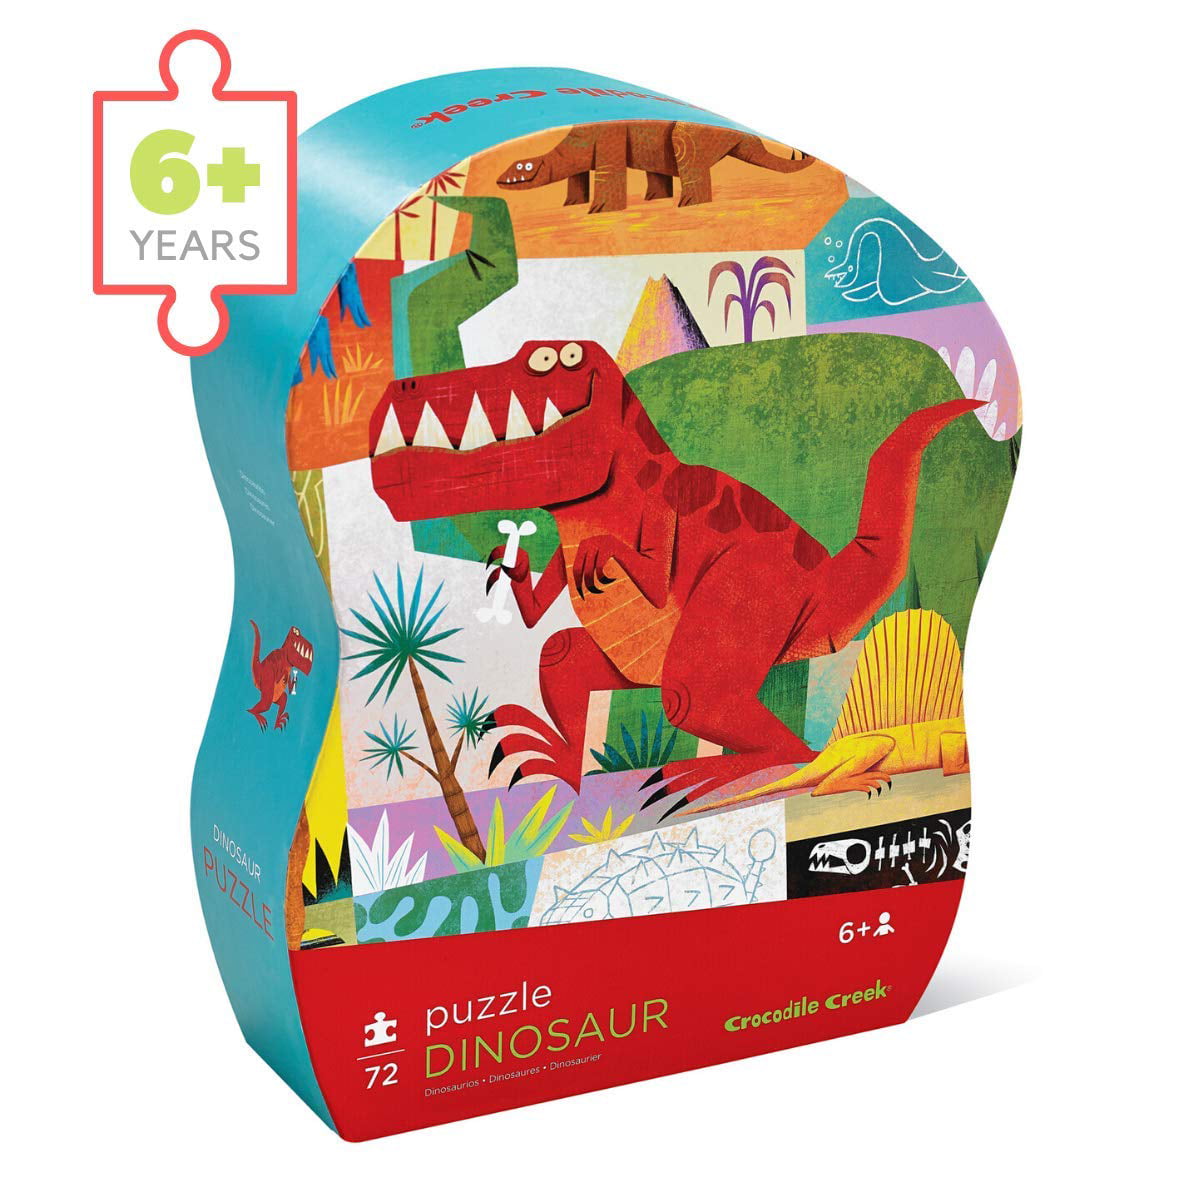 Lets Begin Dinosaurs Crocodile Creek 10 2-Piece Beginner Puzzles for Kids Ages 2 Years